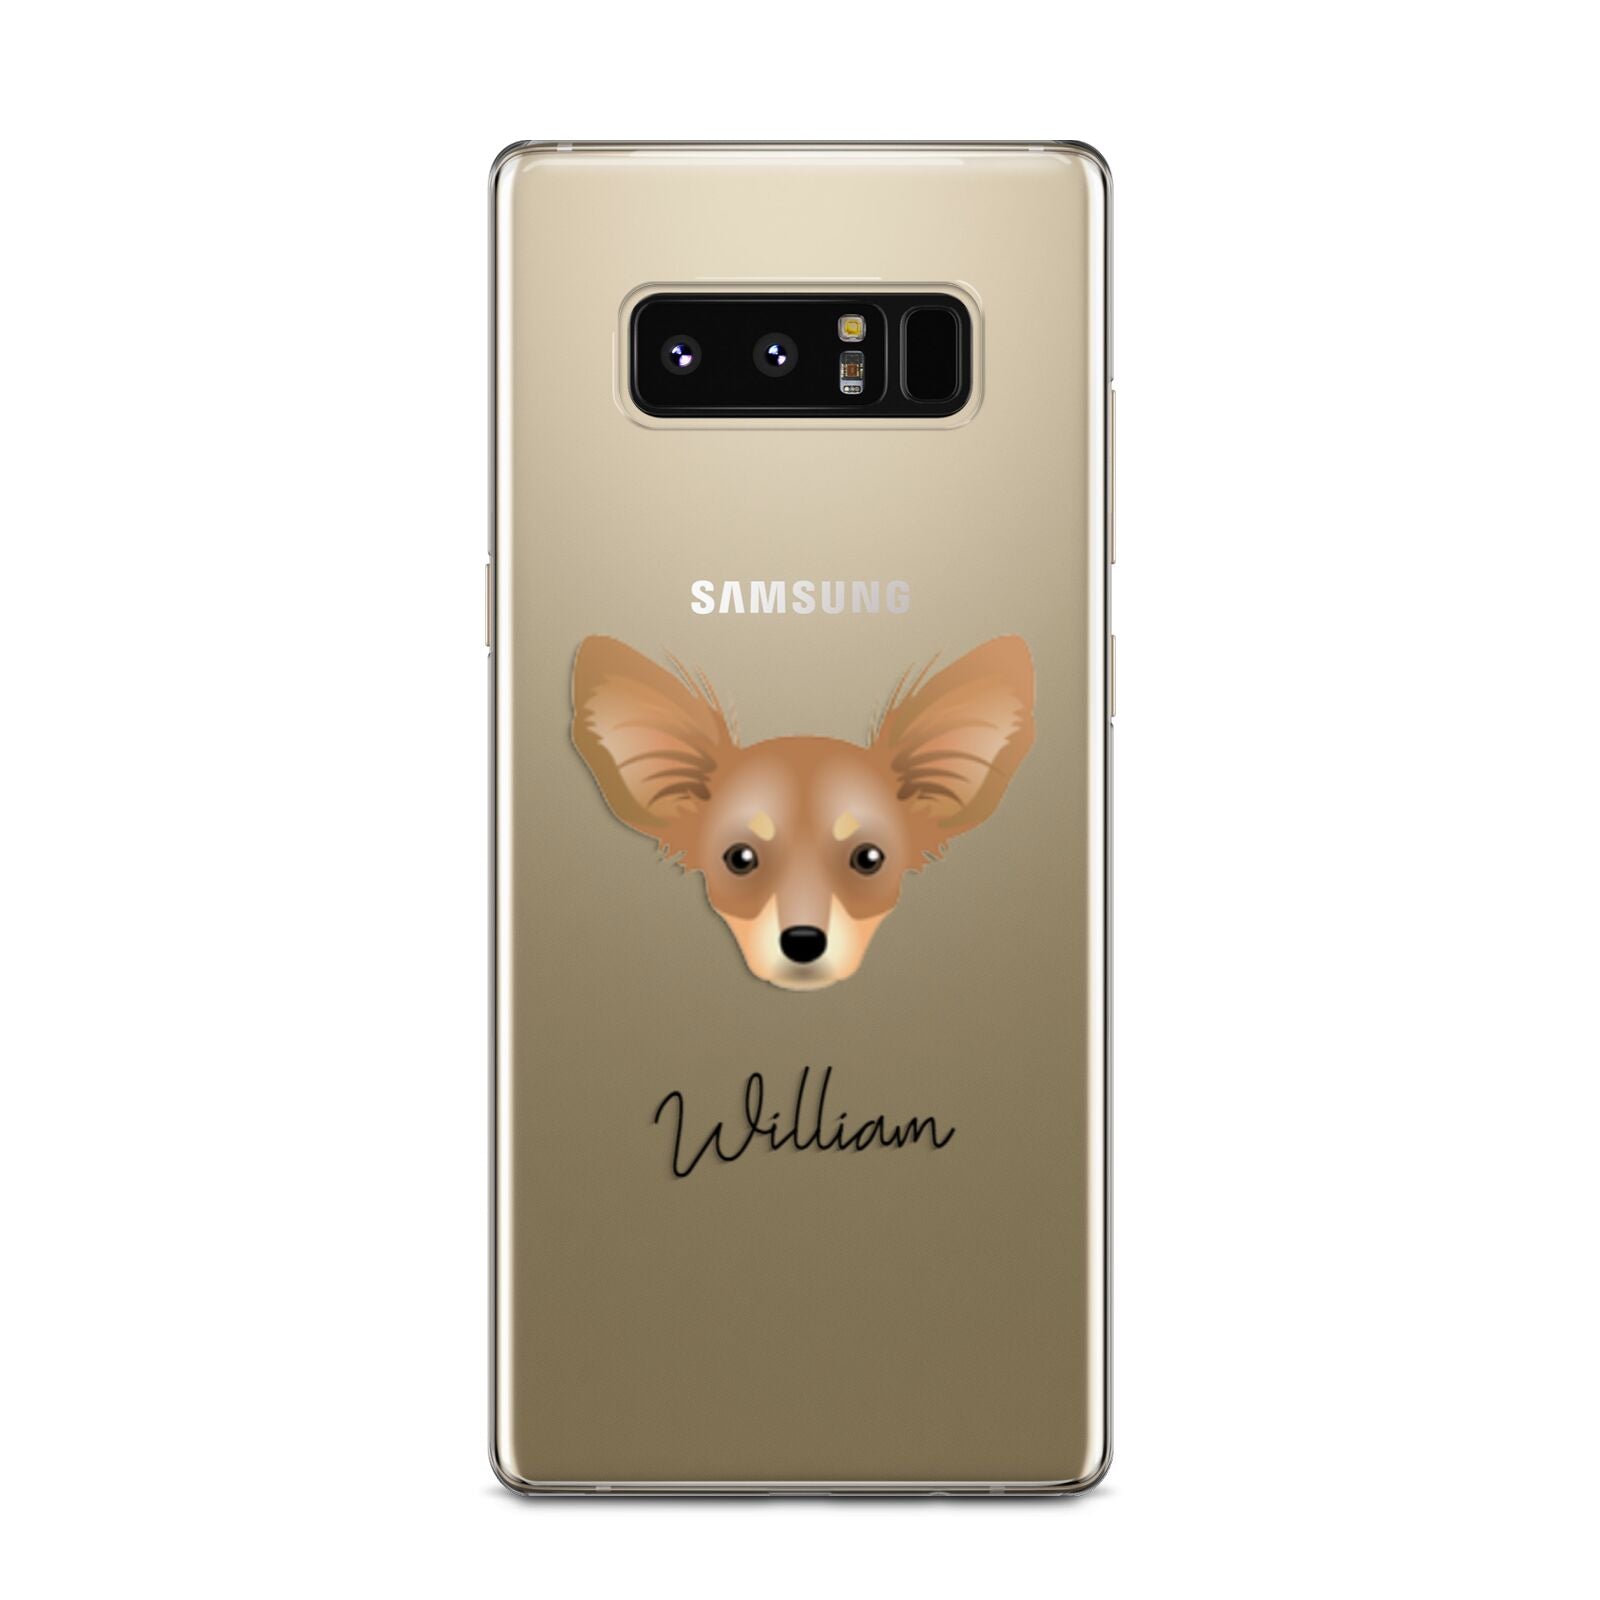 Russian Toy Personalised Samsung Galaxy Note 8 Case